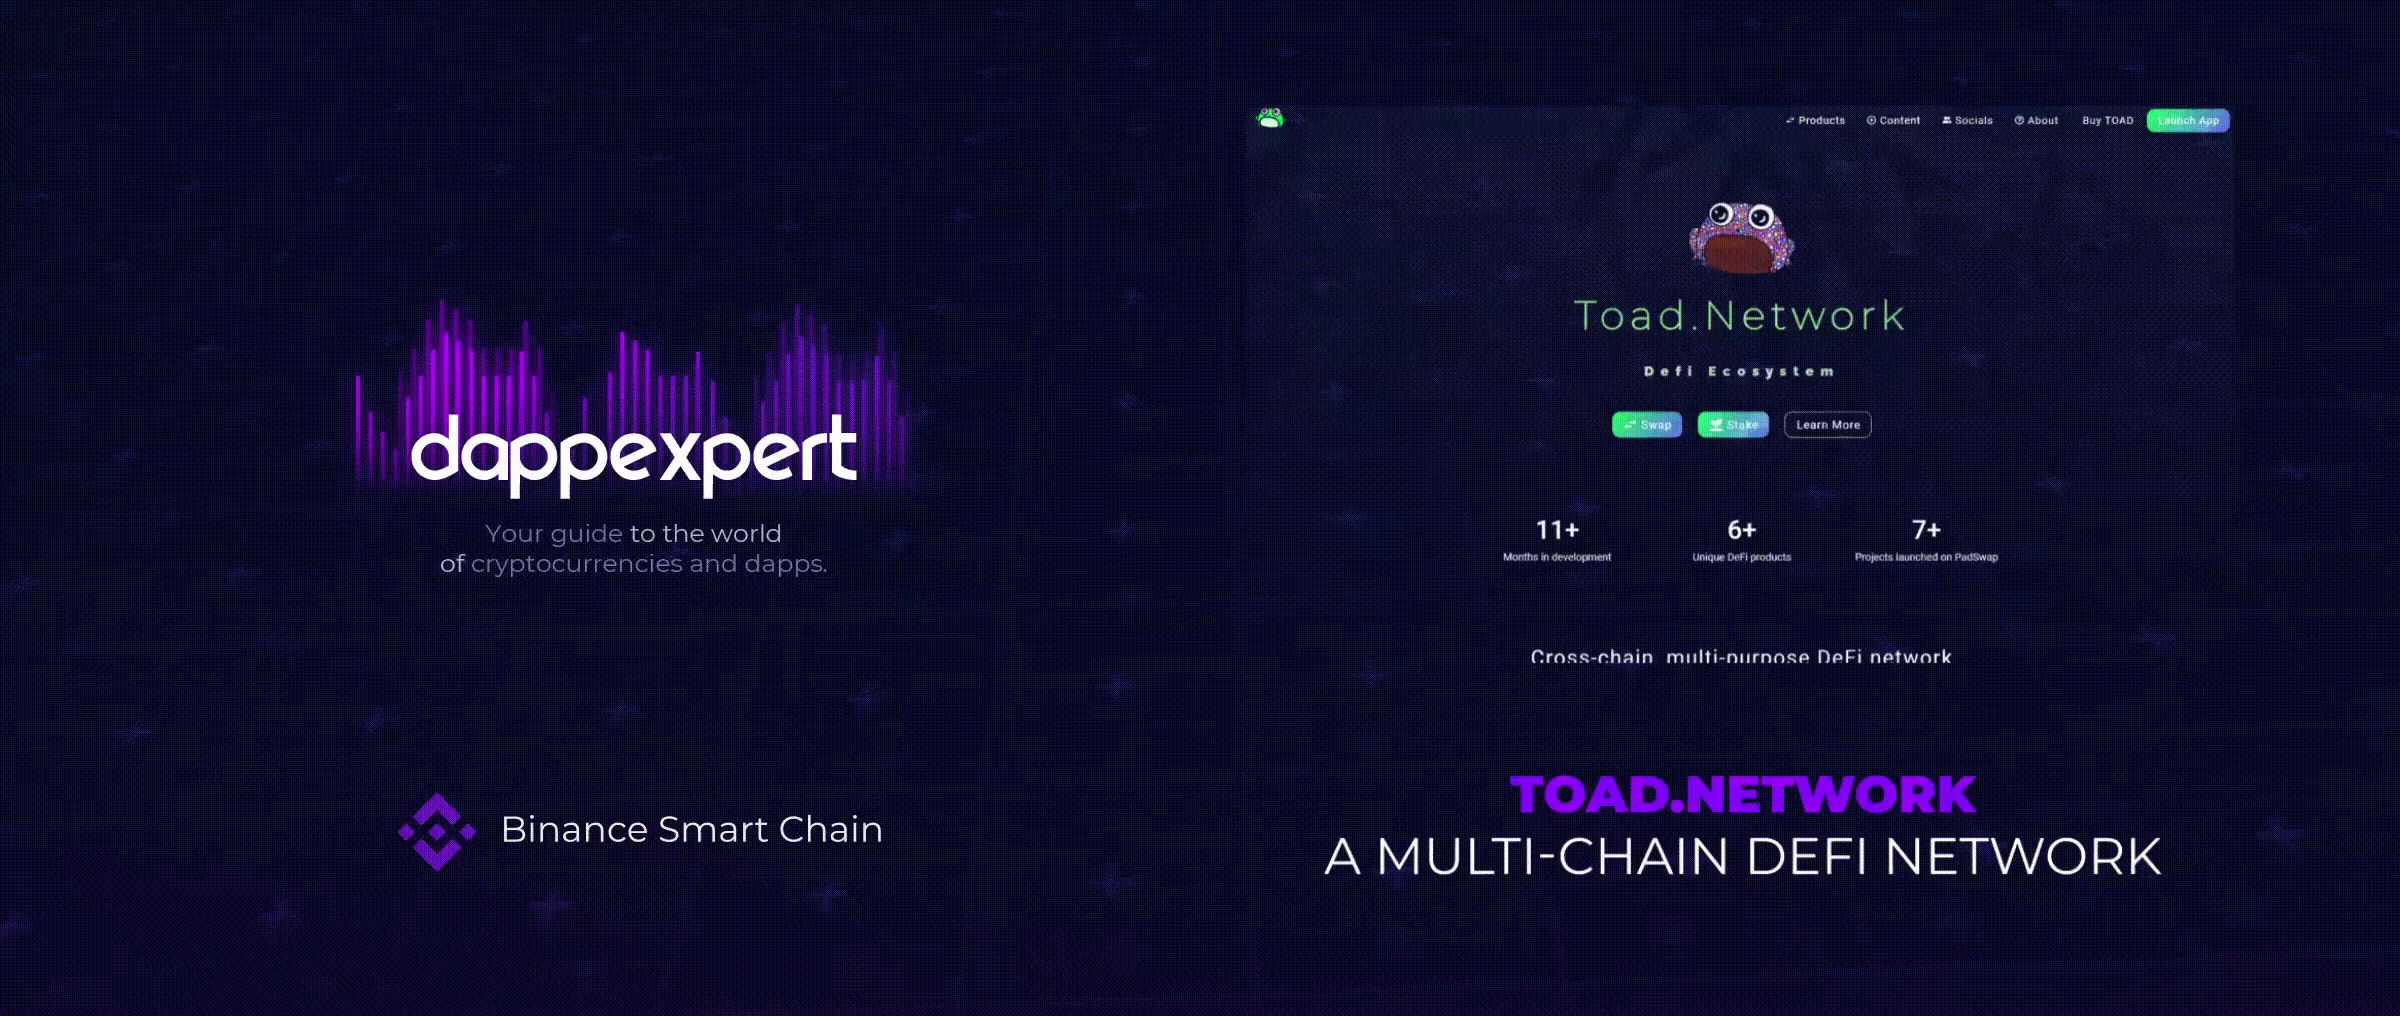 Dapps TOAD.Network